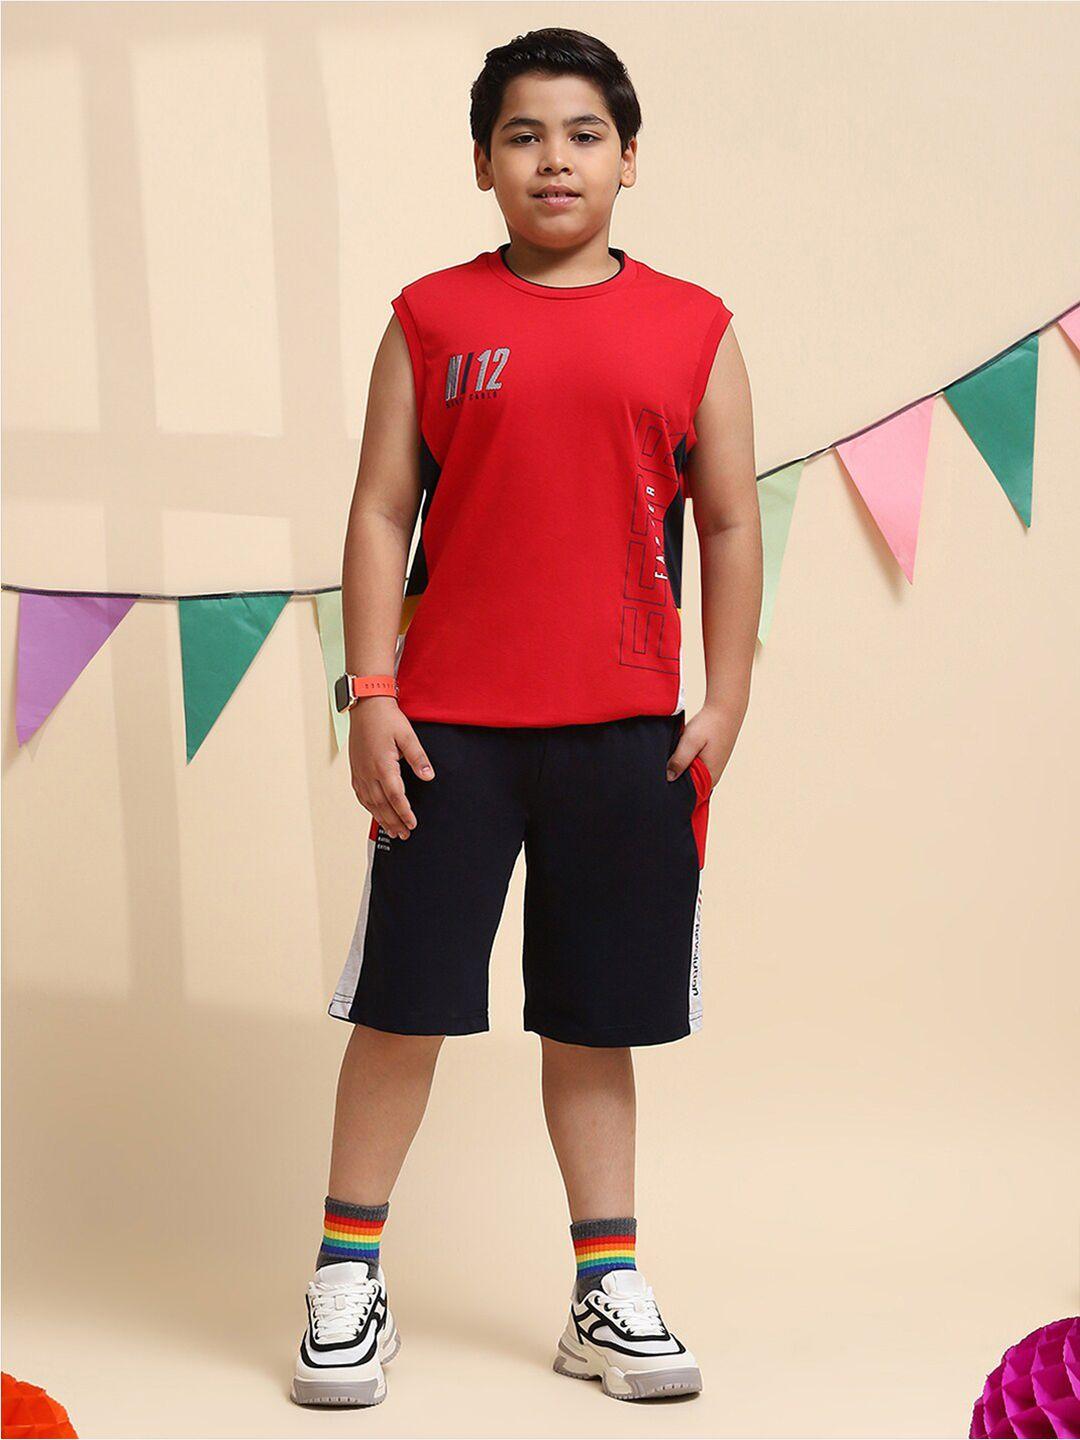 monte-carlo-boys-printed-t-shirt-with-shorts